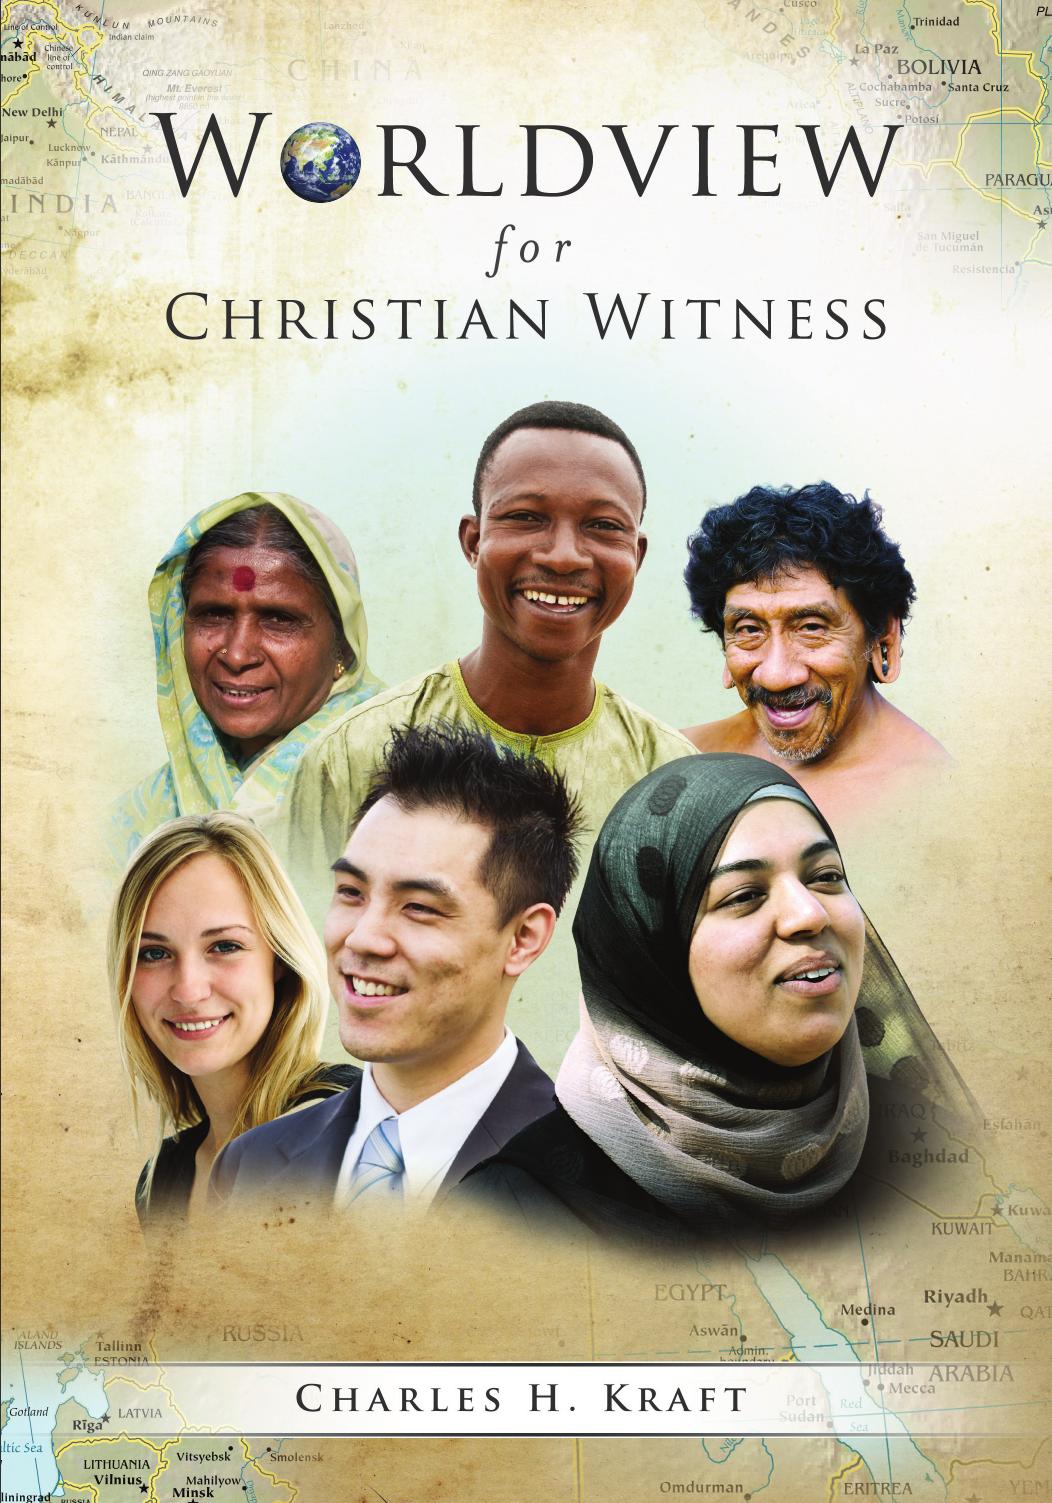 Worldview for Christian Witness by Charles H. Kraft